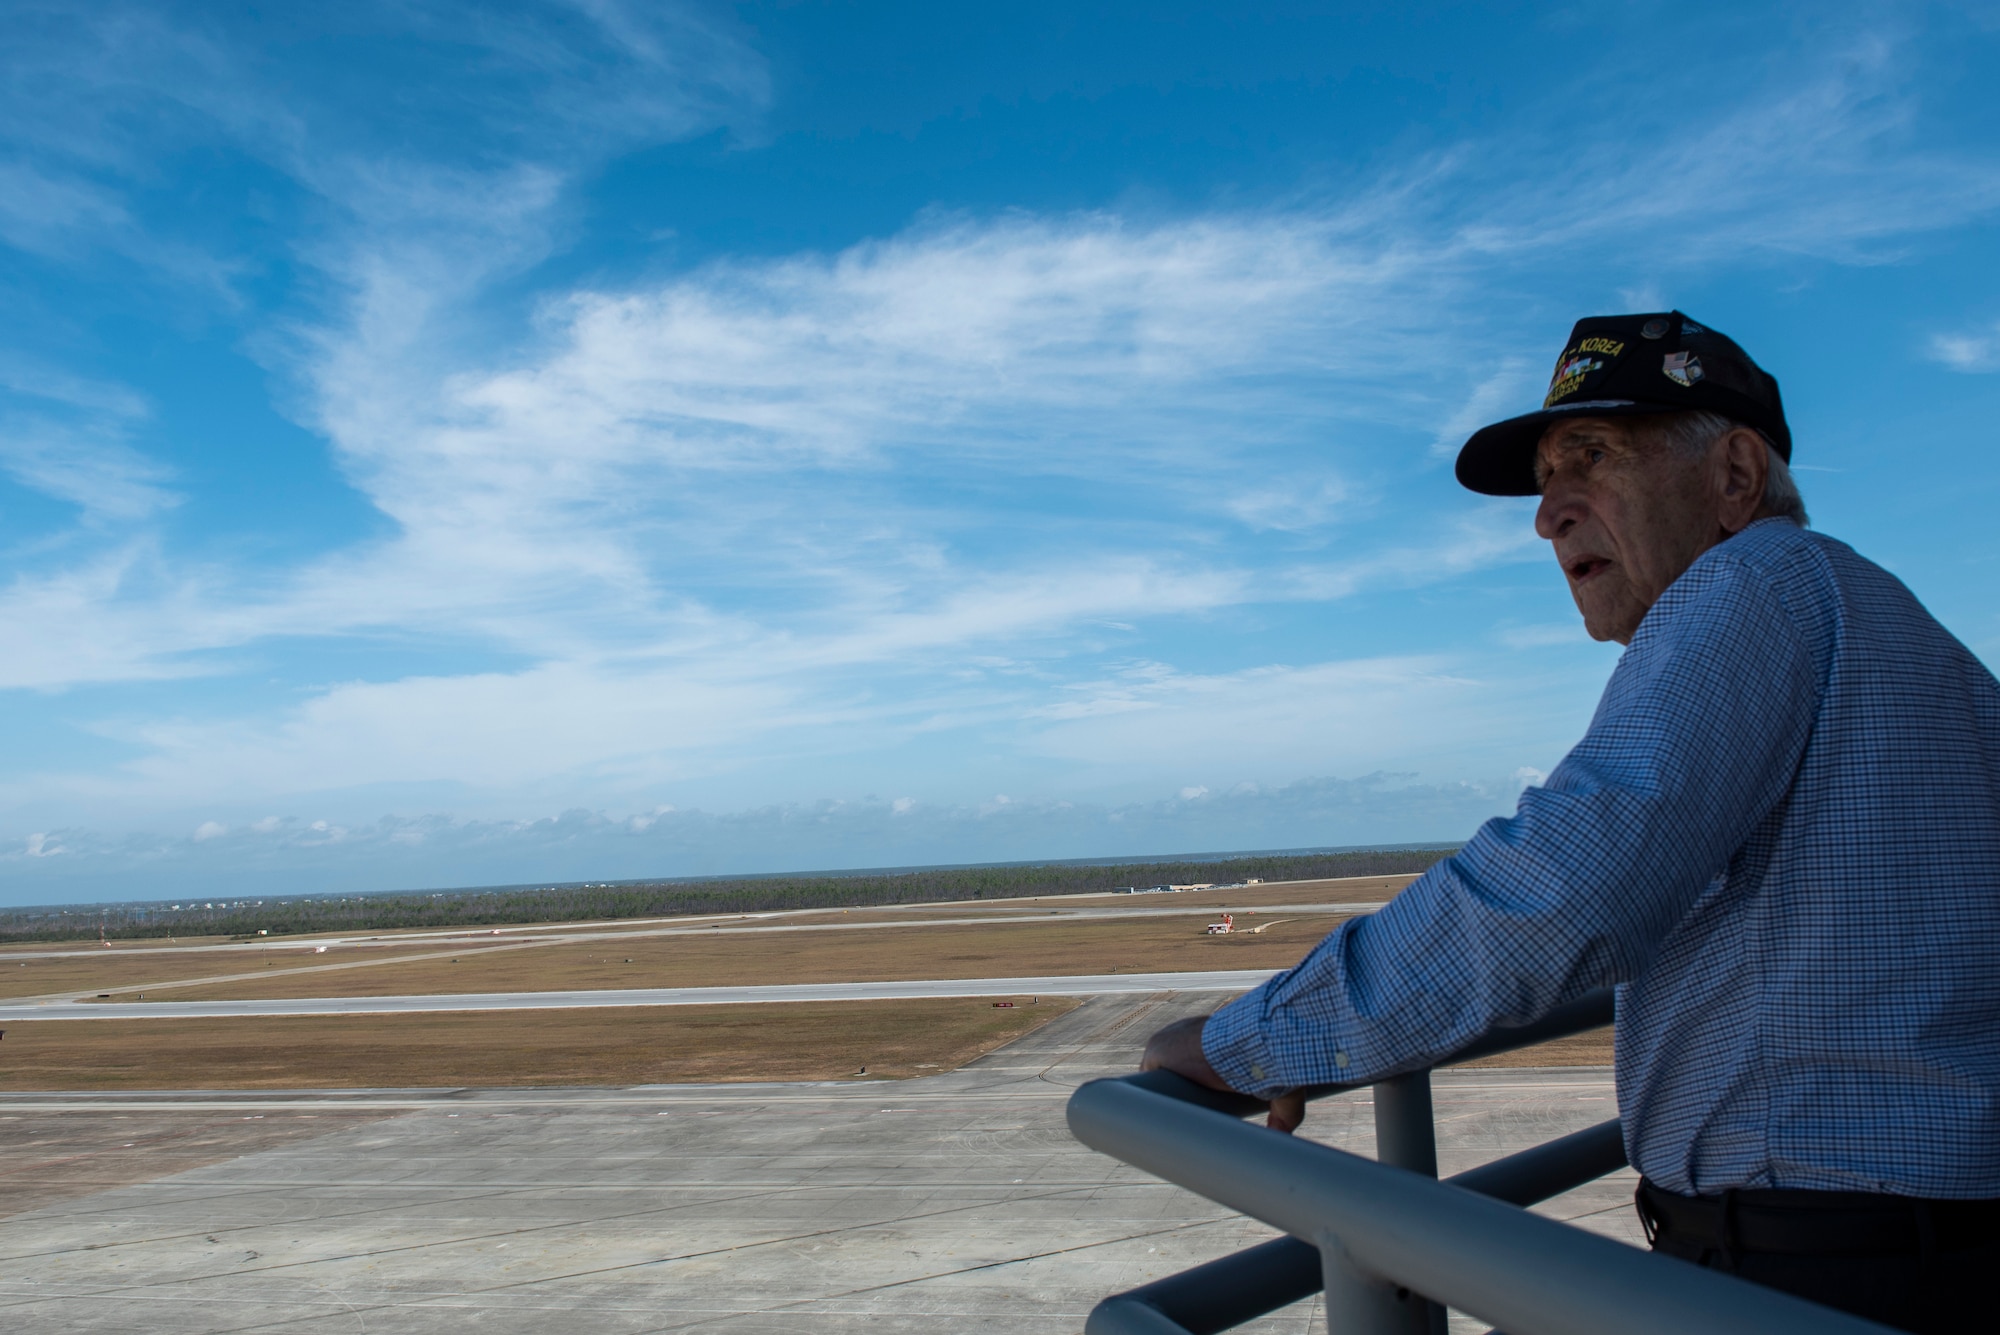 Retired U.S. Air Force Lt. Col. Daniel Daube, visited the 325th Fighter Wing air traffic control tower at Tyndall Air Force Base, Florida, Nov. 27, 2019. Daube was a veteran of World War II, Korean, and Vietnam war, flying multiple air frames and combat missions. Daube visited Tyndall's air traffic control tower and saw planes launch off the runway. (U.S. Air Force photo by Staff Sgt. Magen M. Reeves)